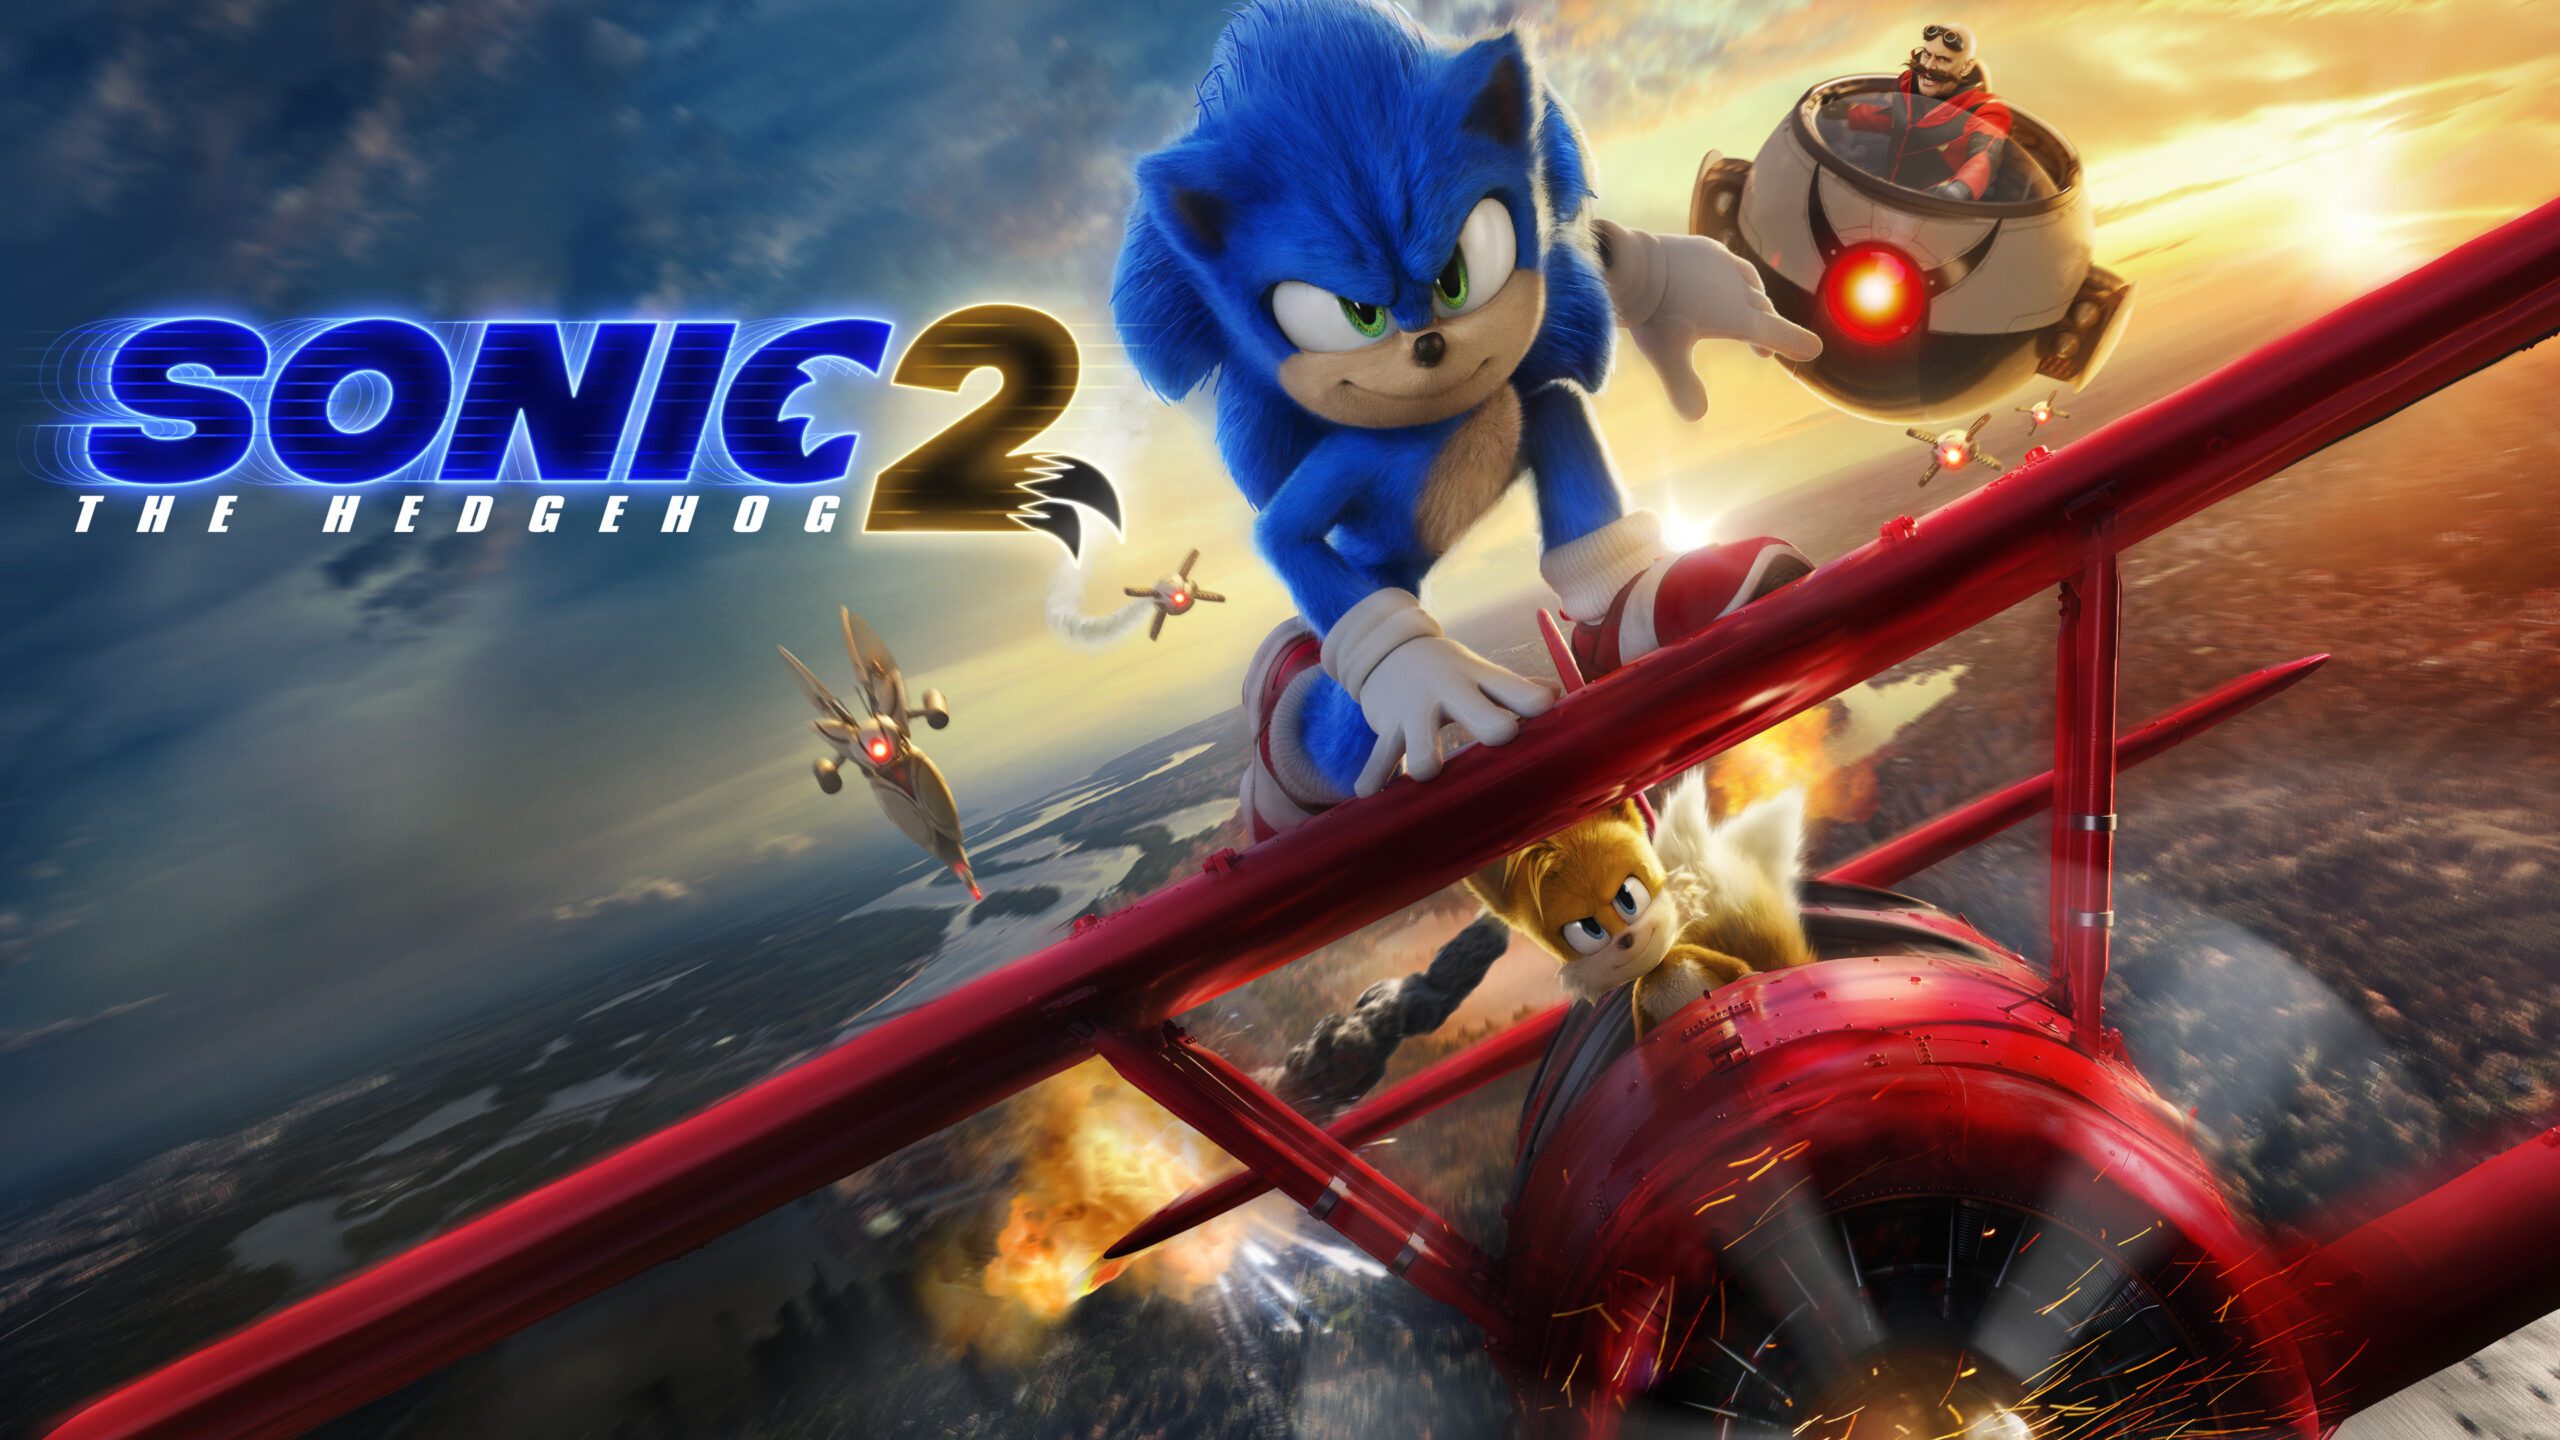 Paramount Confirms Third Sonic Movie, Knuckles Series For Paramount+ On The Way